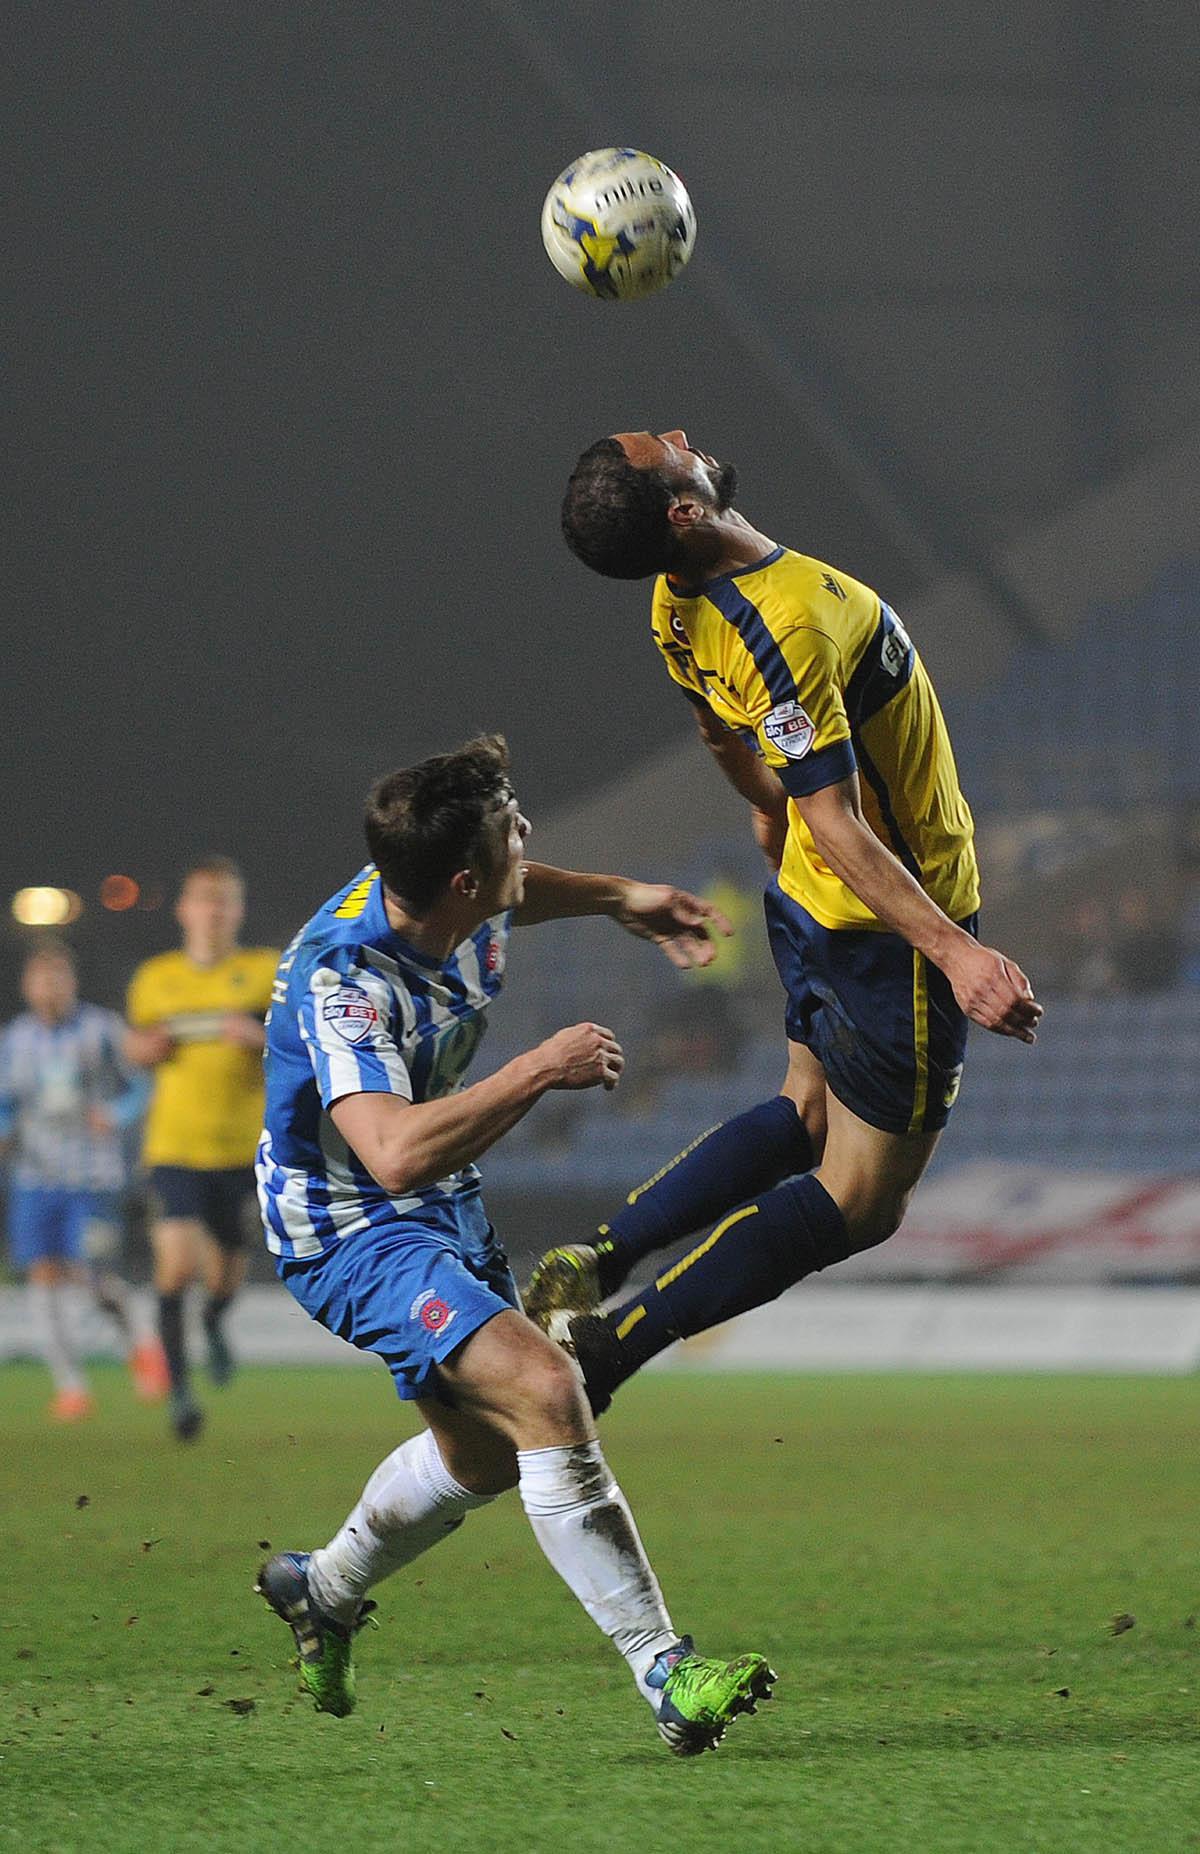 Oxford United v Hartlepool in pictures